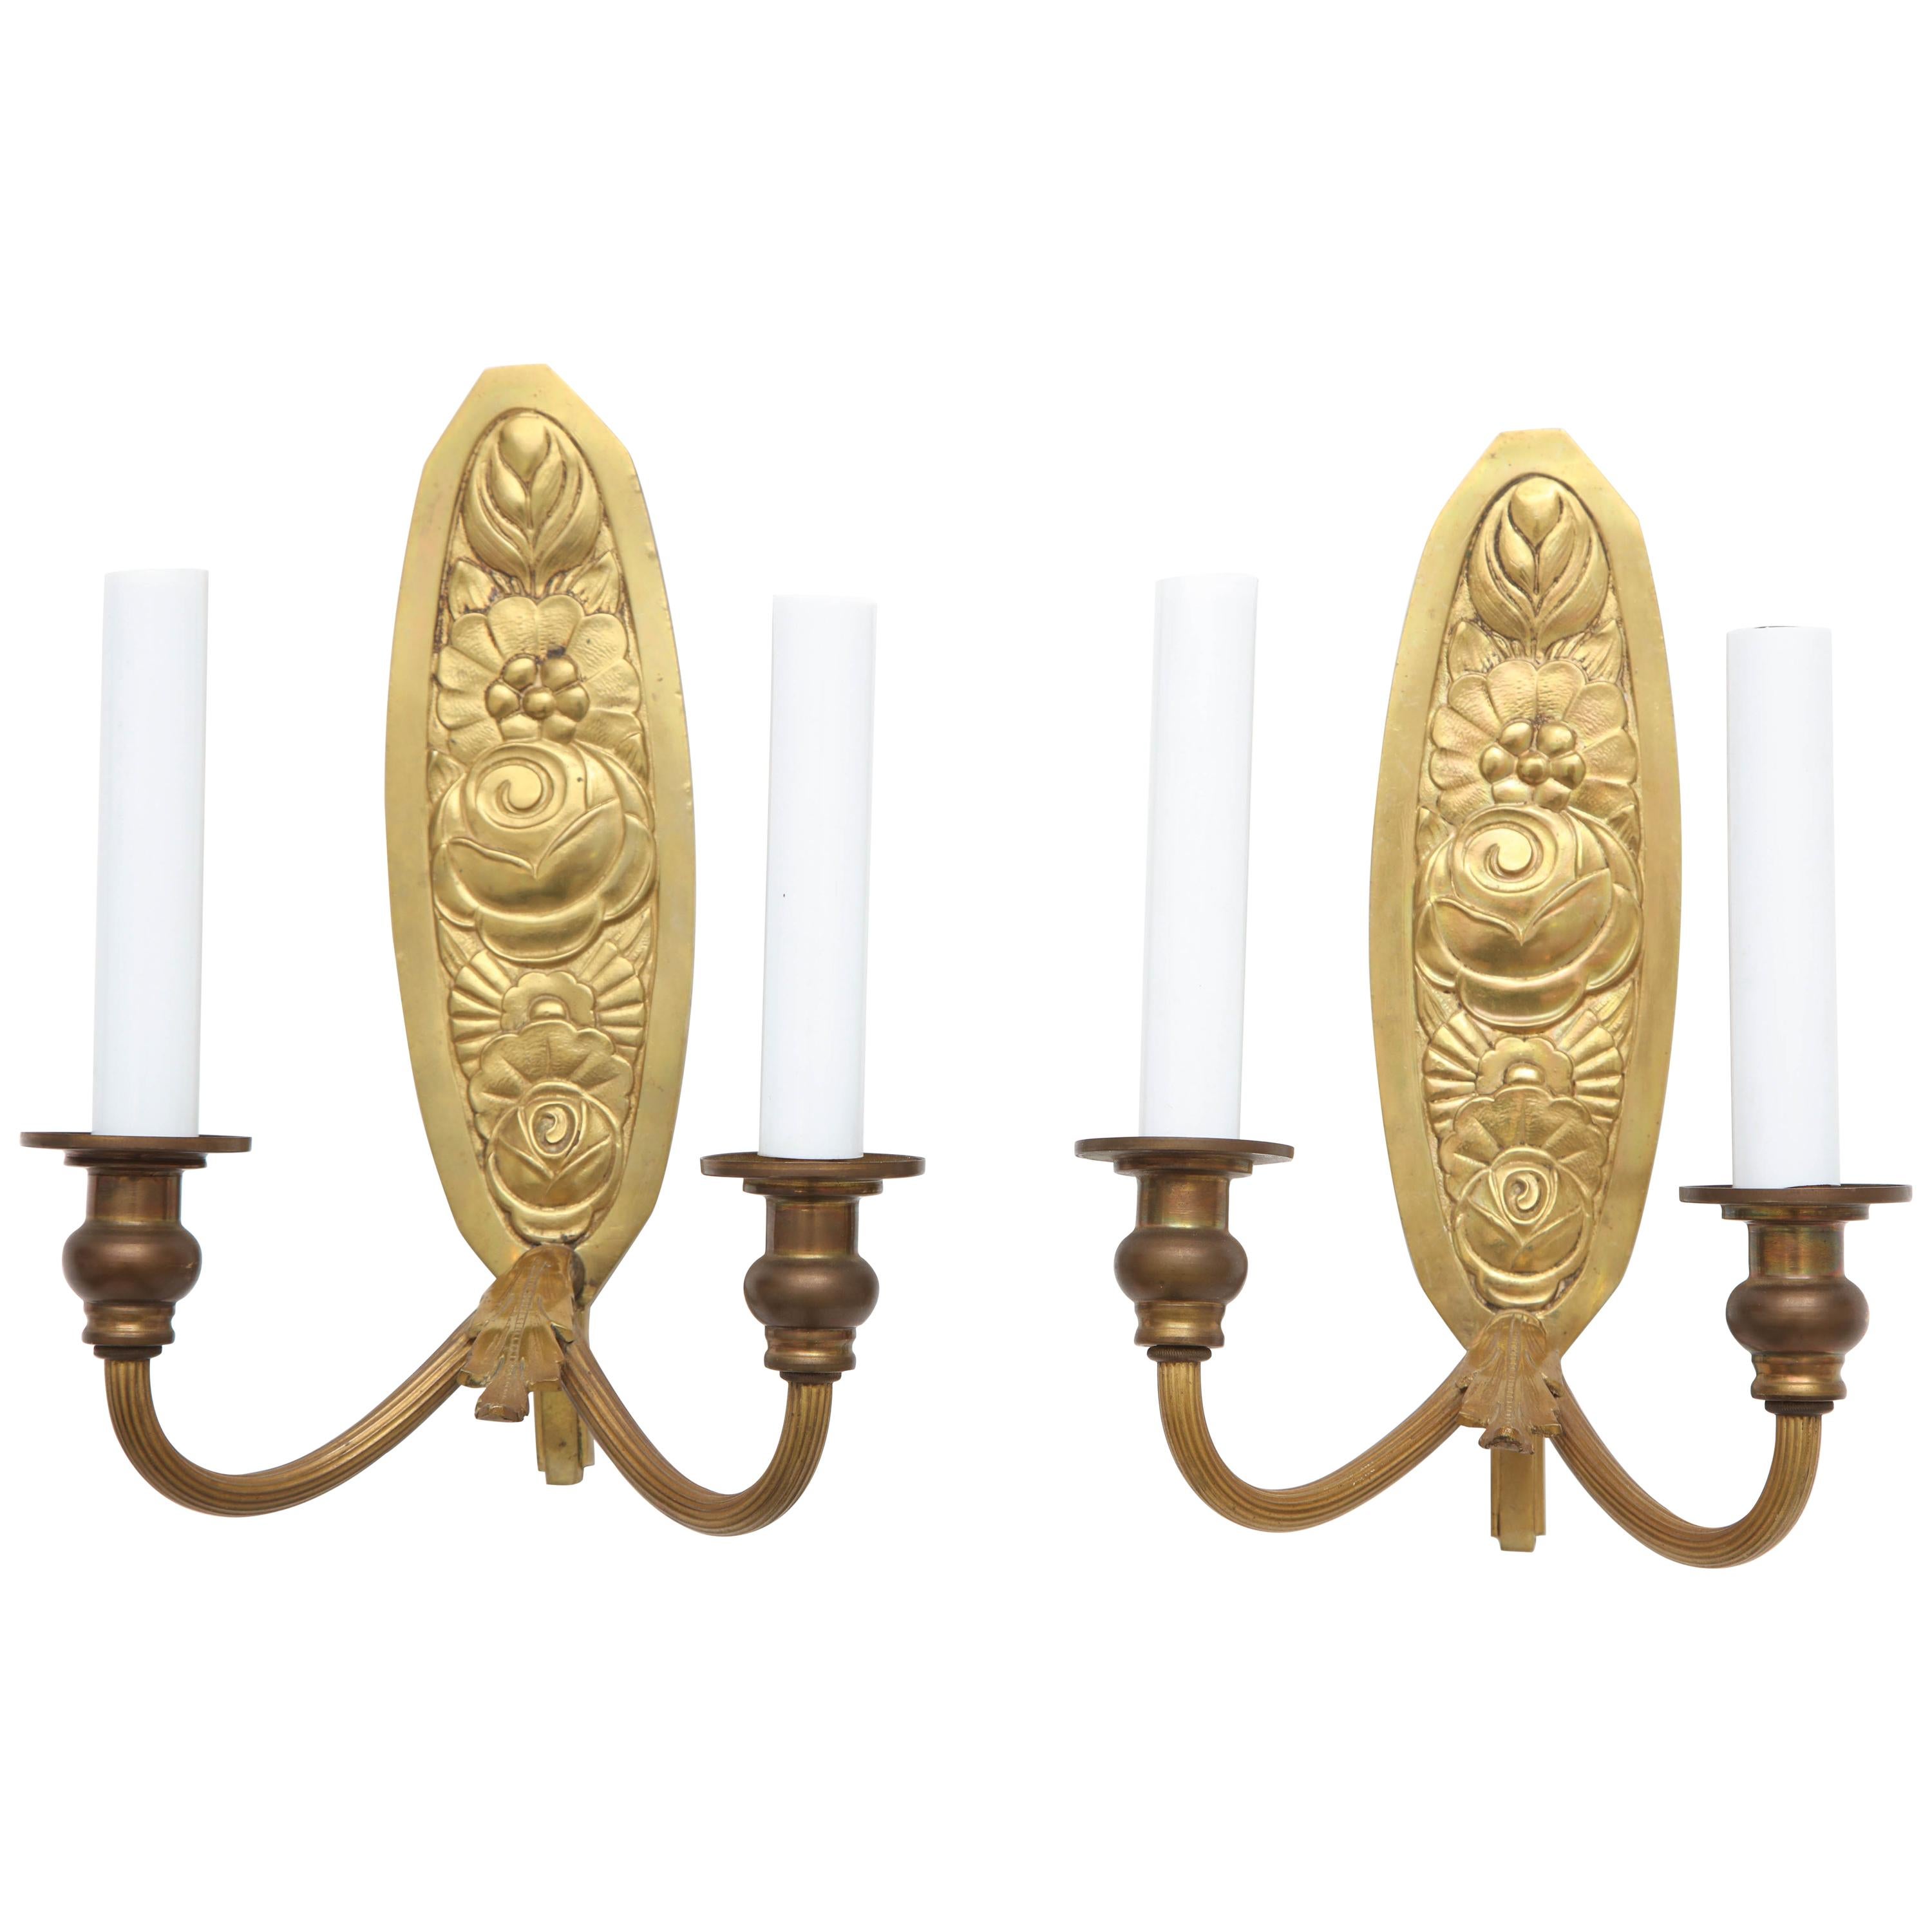 Pair of Vintage French Bronze Wall Candle Sconces